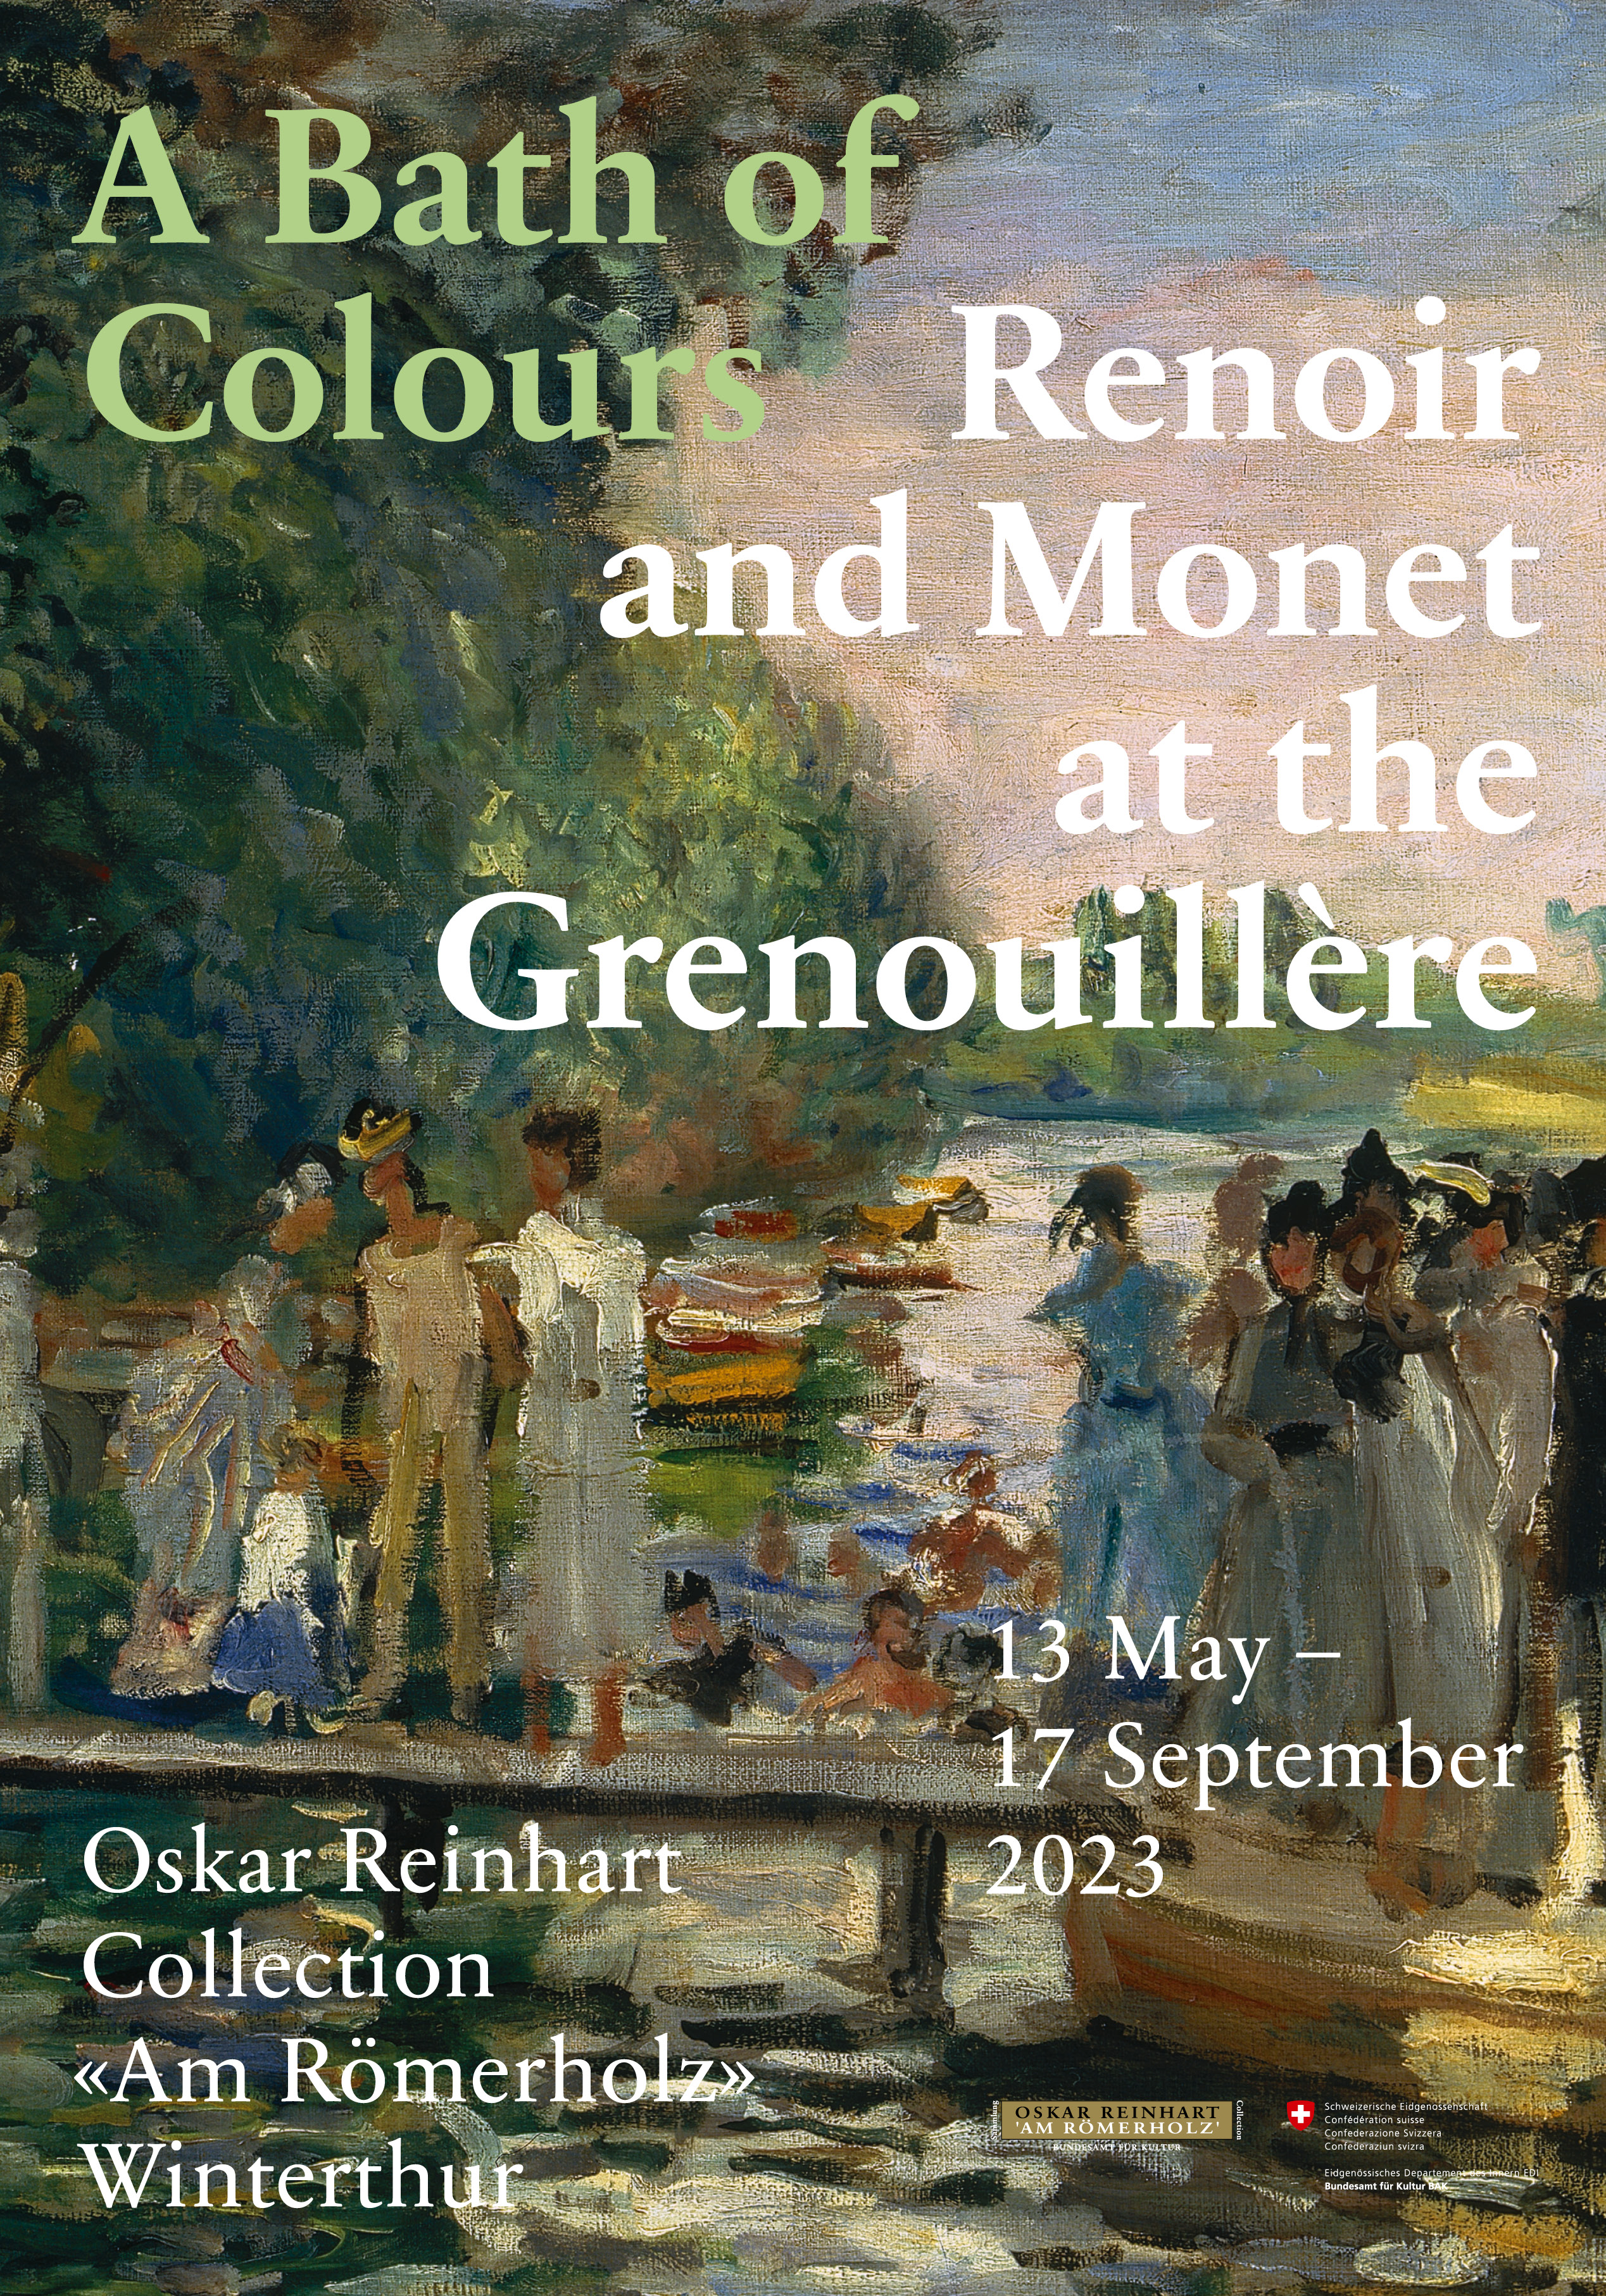 A Bath of Colours - Renoir and Monet at the Grenouillère